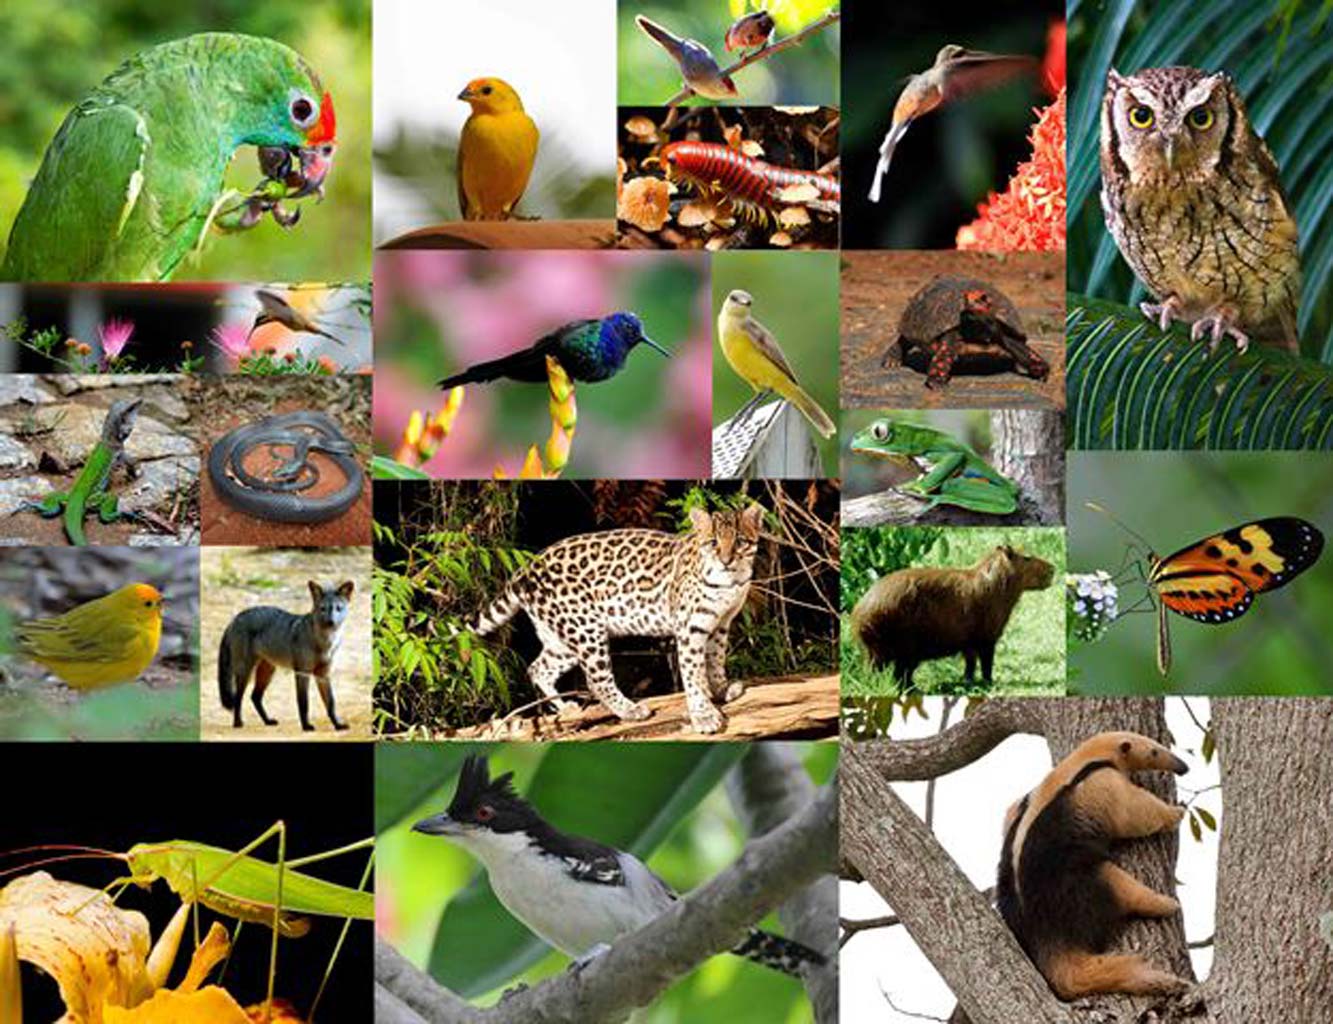 Among birds, 172 species have been identified, of which six are in danger of extinction. There are 33 species of mammals, two of which are in the process of world-wide extinction (classified as ‘vulnerable’). There are also 15 species of amphibians; 15 species of reptiles; and 293 species of plants.